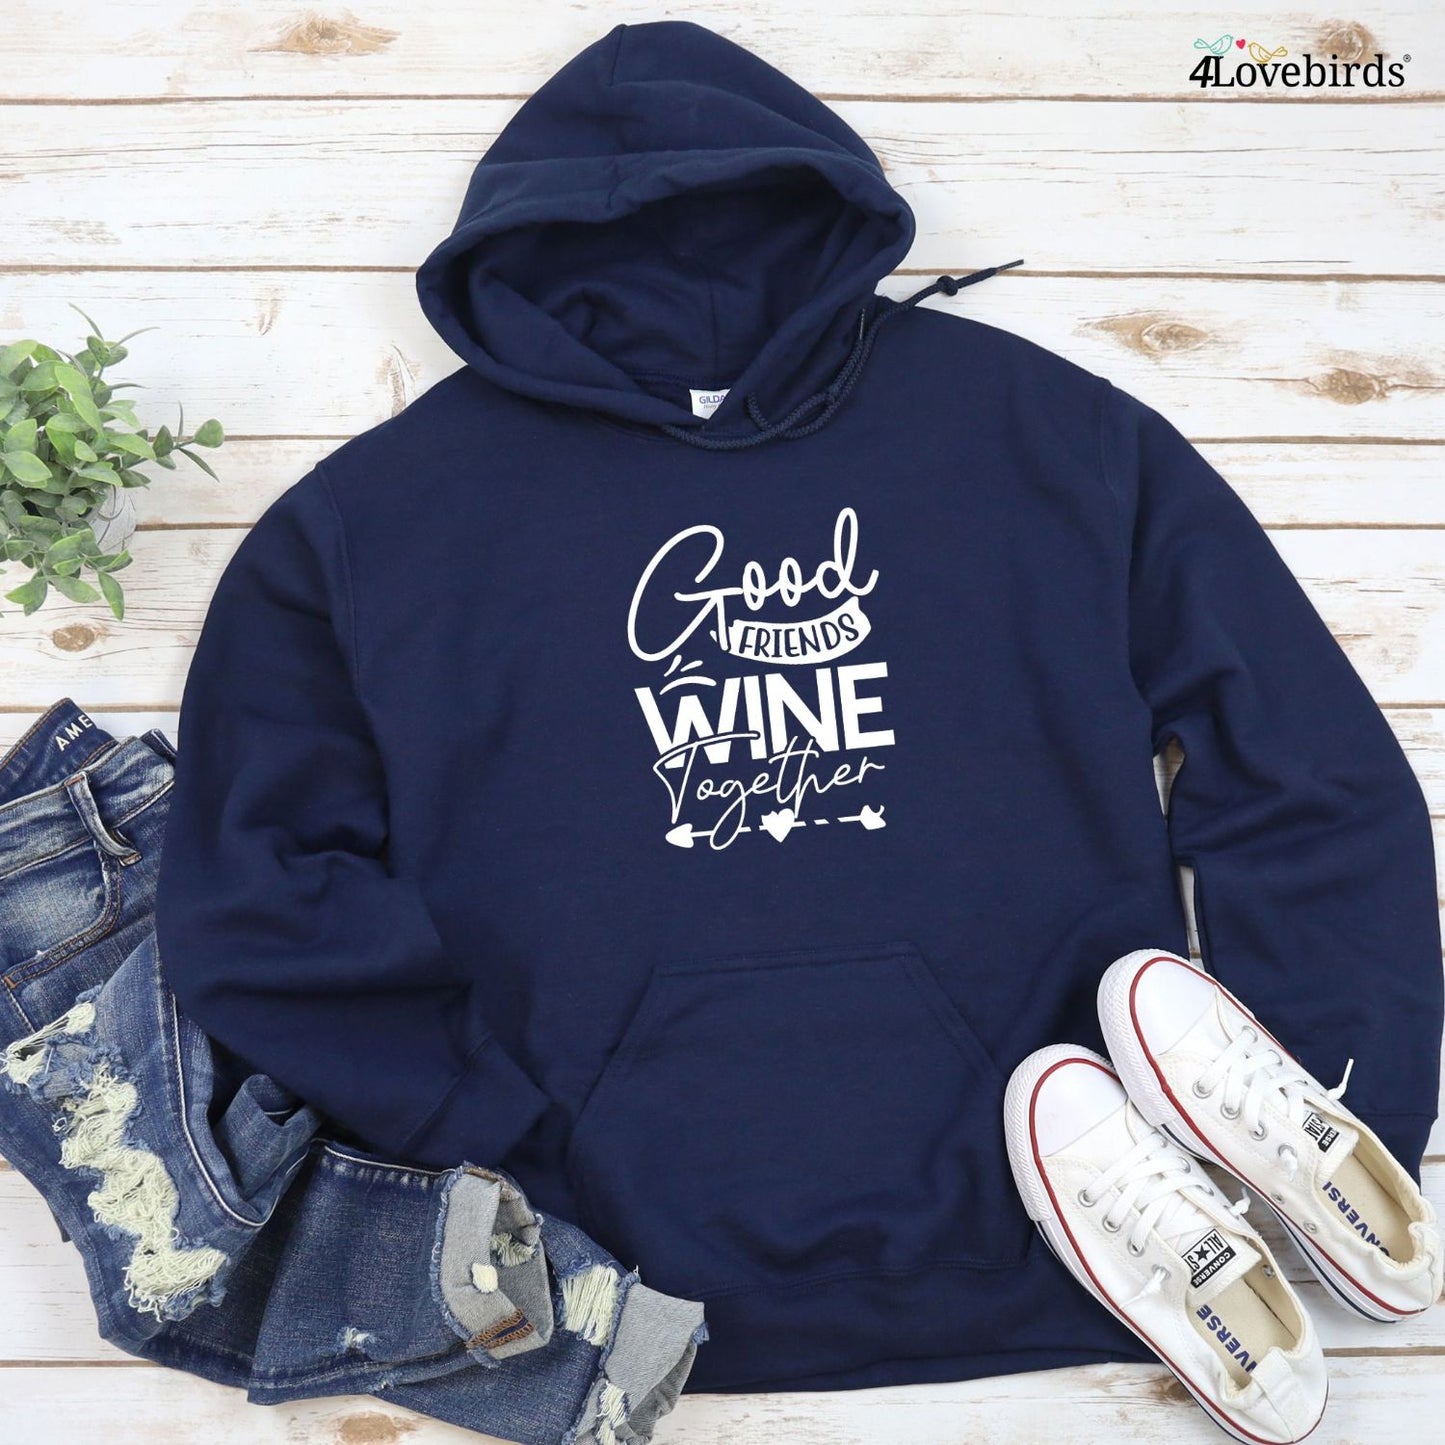 Wine Lover Matching Outfit Set - Good Friends Wine Together, Humorous Best Friend Gift